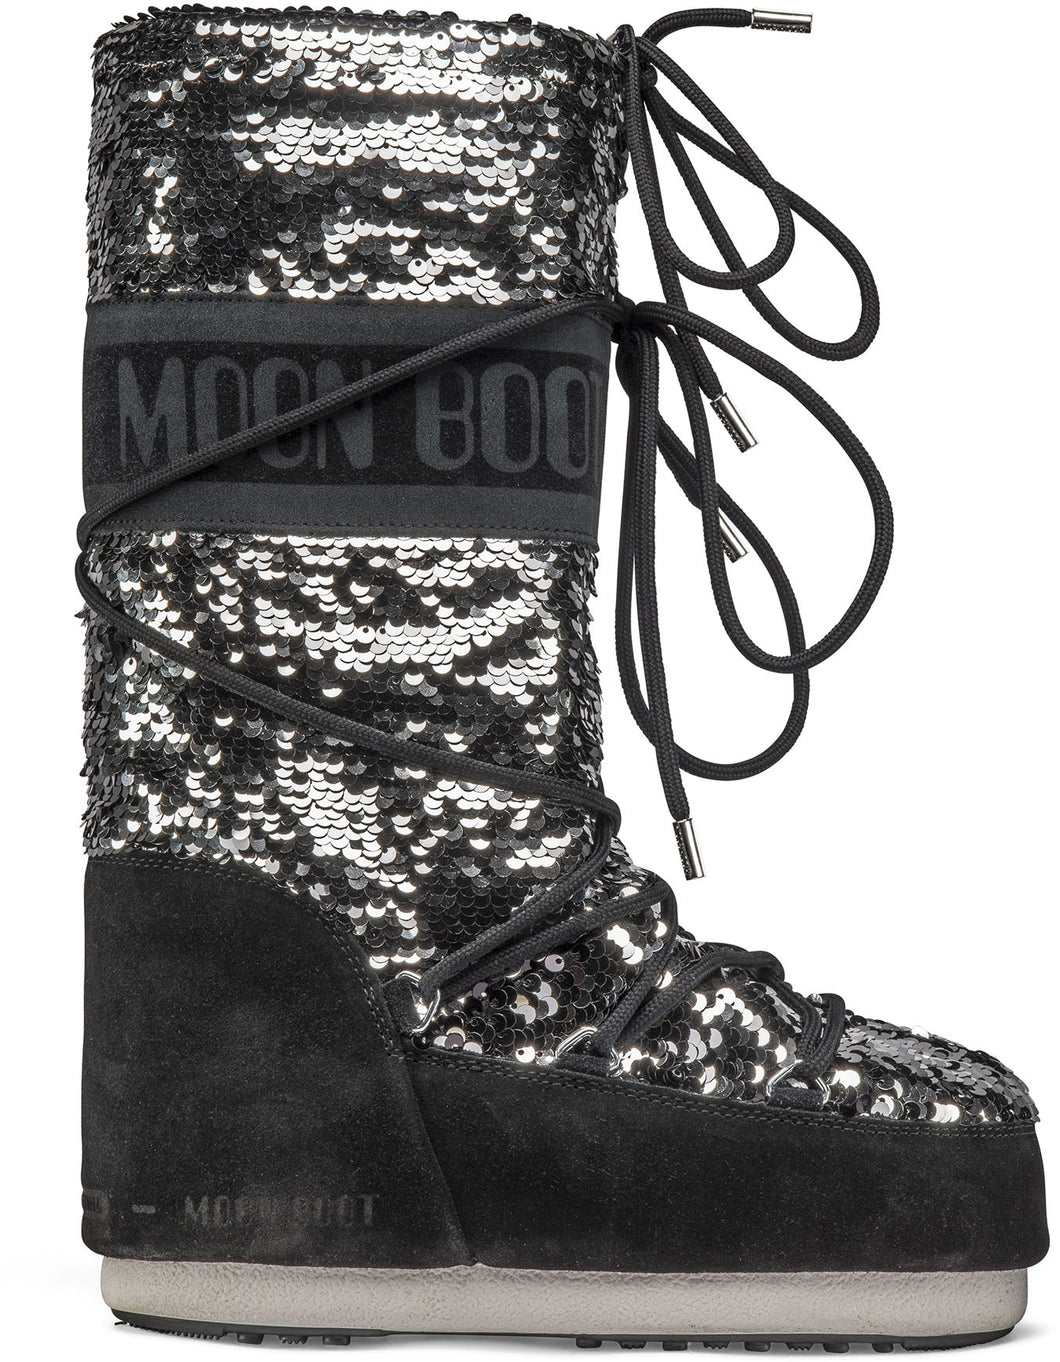 Classic Moon Boots in Black - Moon Boot